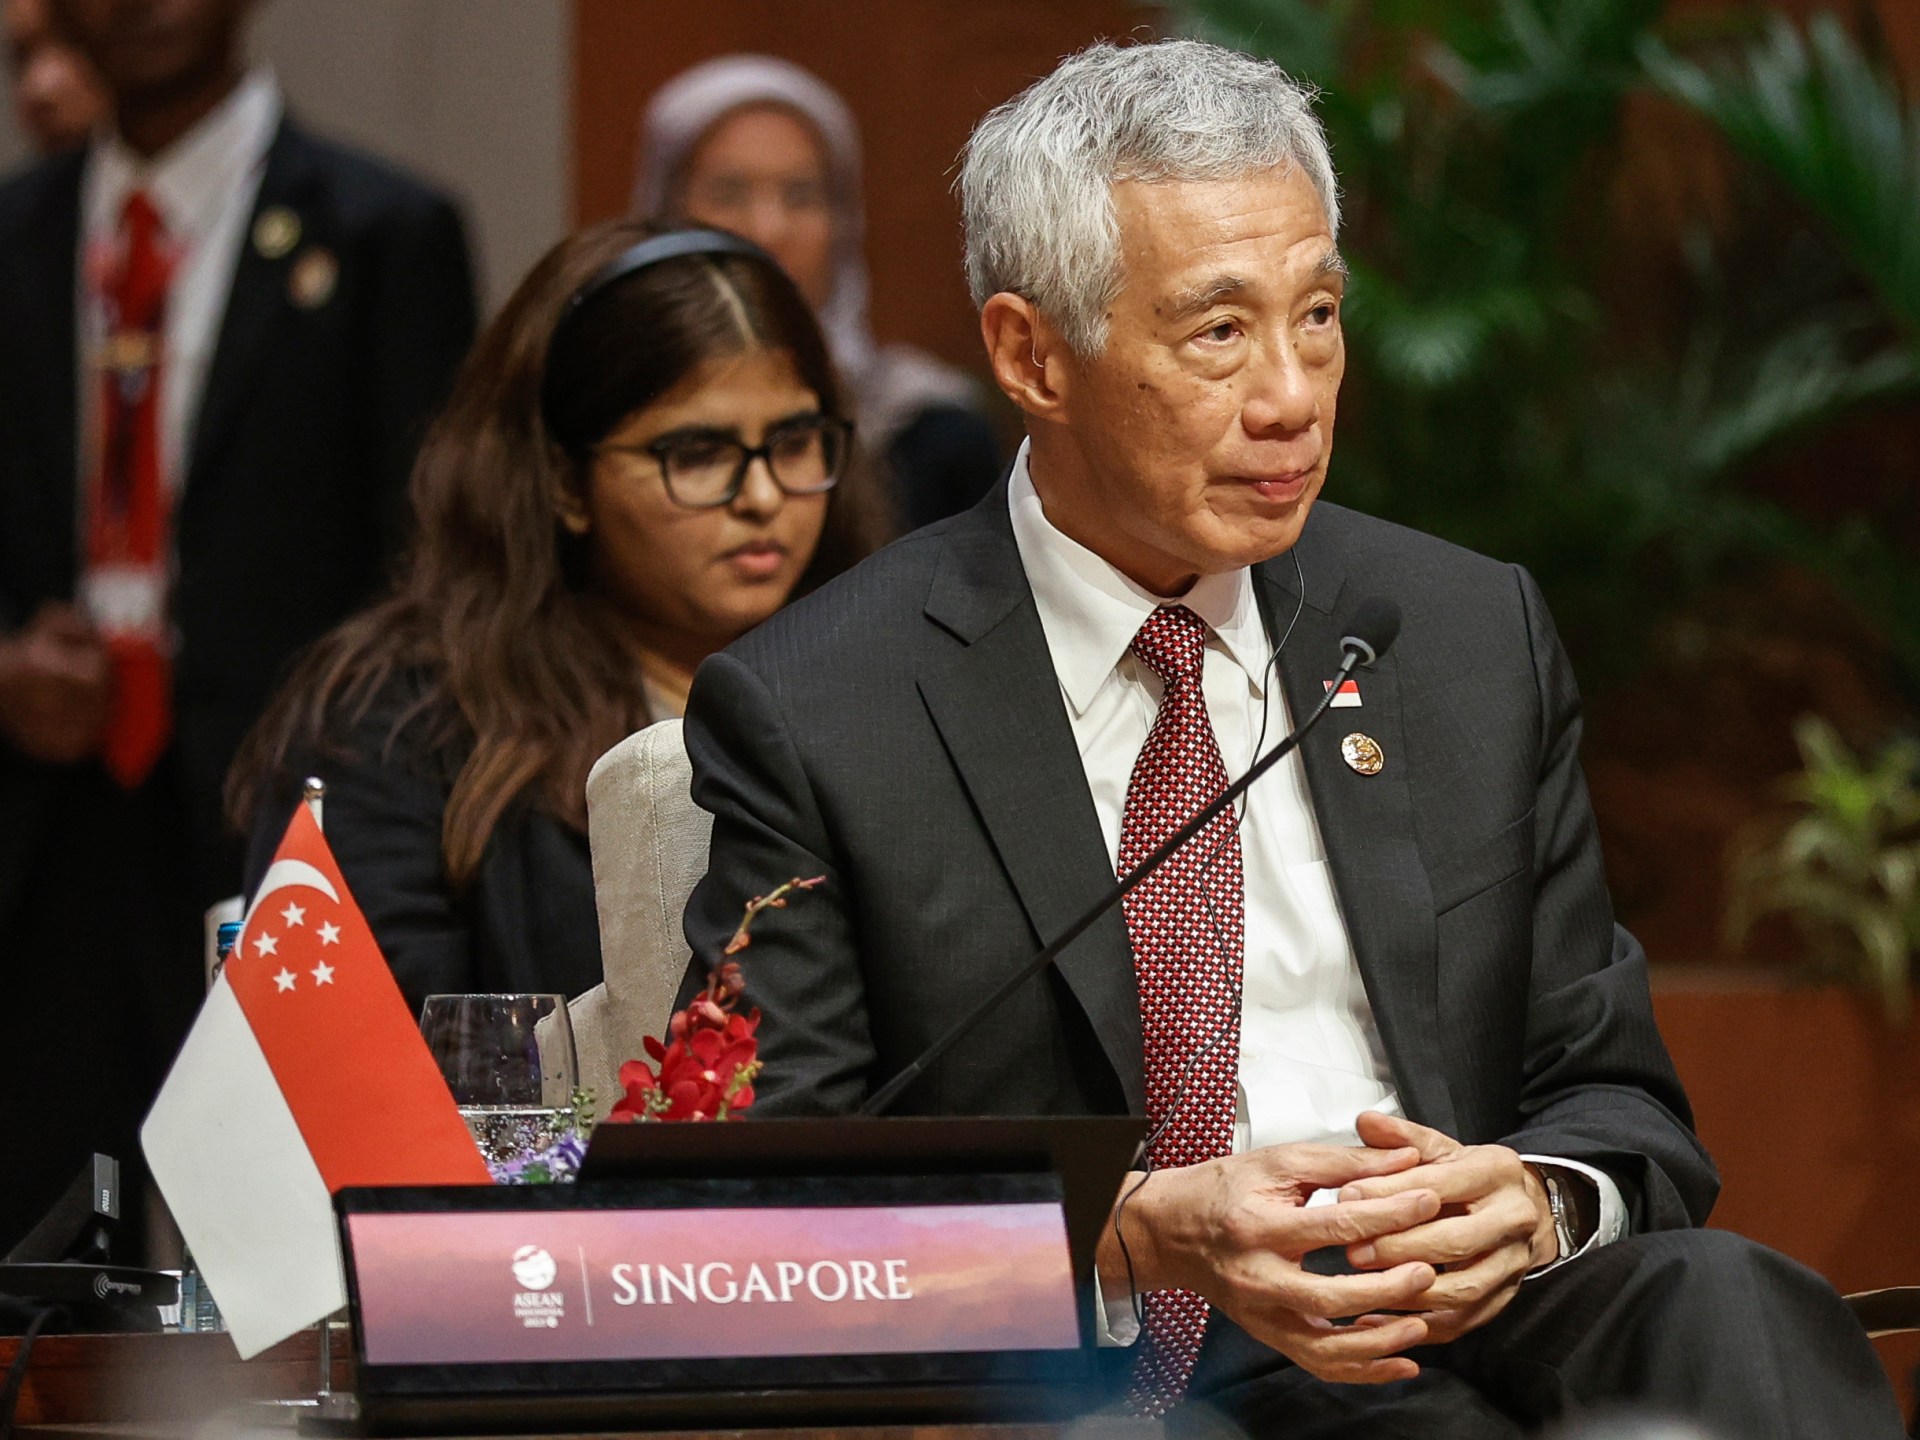 Singapore’s Lee Hsien Loong says he will step down as early as next year